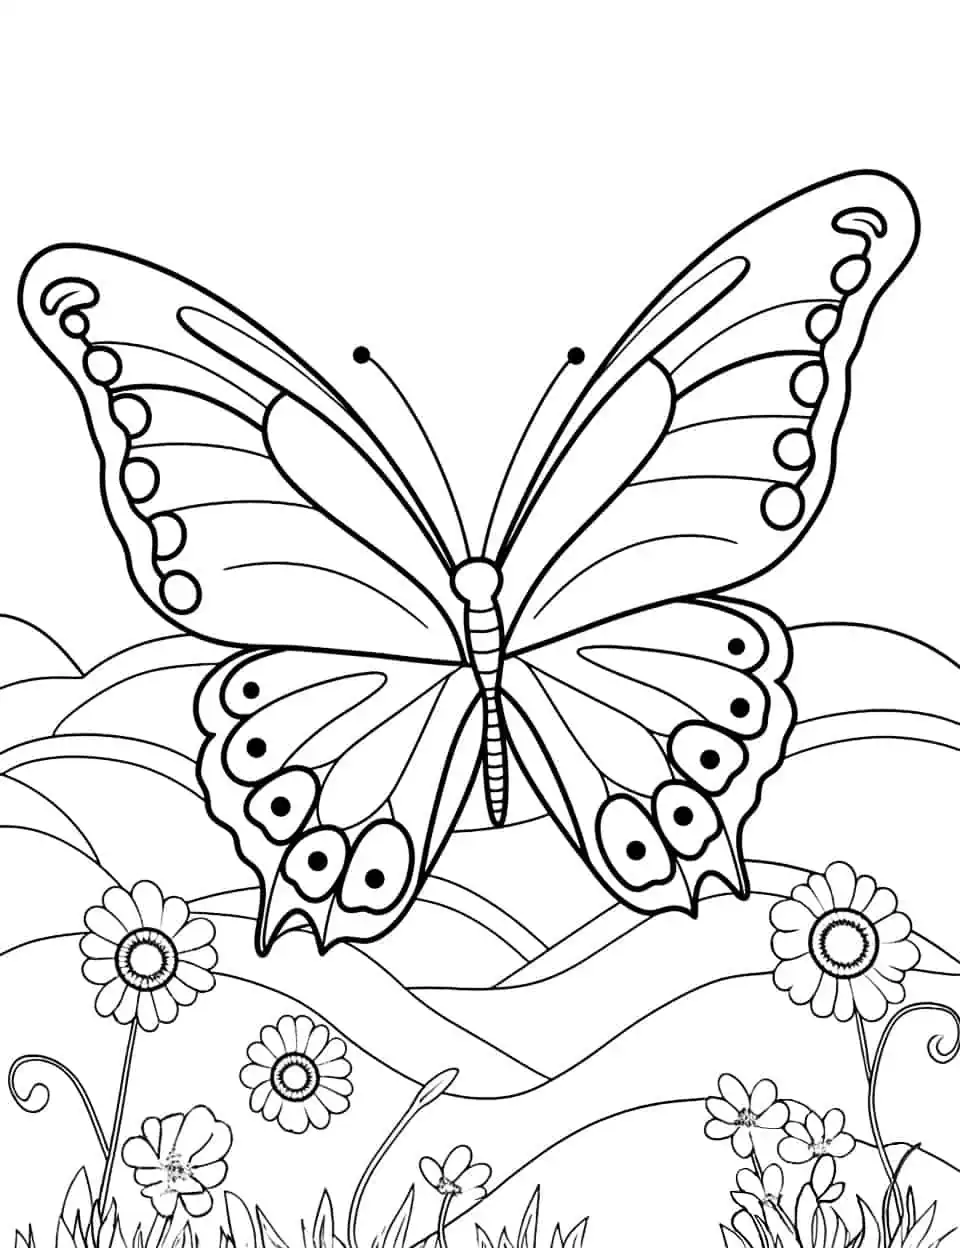 Serene Escape Butterfly Coloring Page - A coloring page depicting a butterfly surrounded by peaceful landscapes and soothing elements.